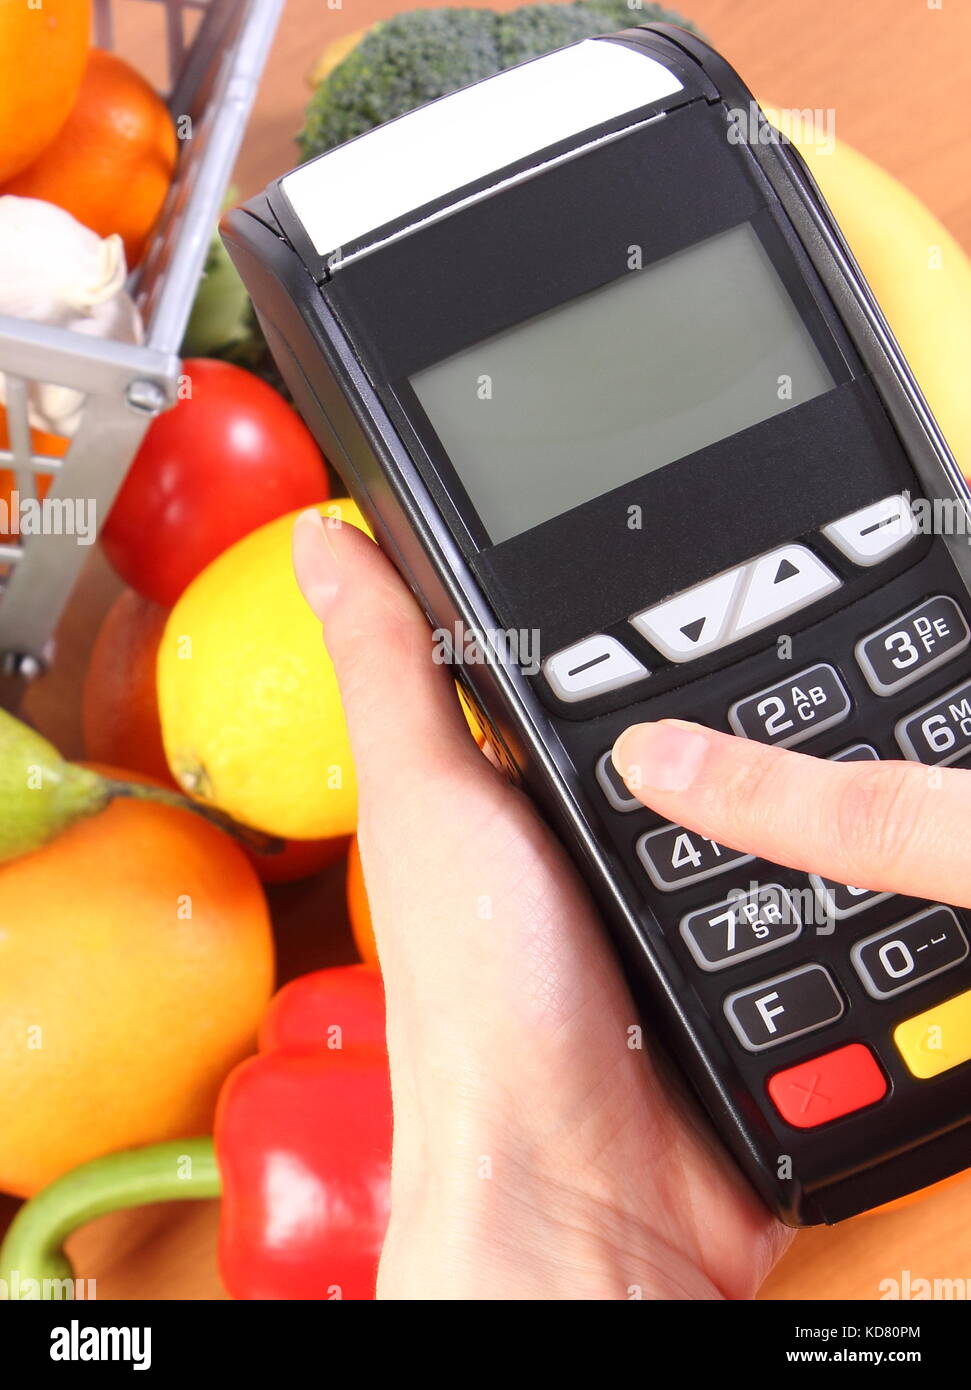 Enter personal identification number on payment terminal and fresh fruits with vegetables Stock Photo